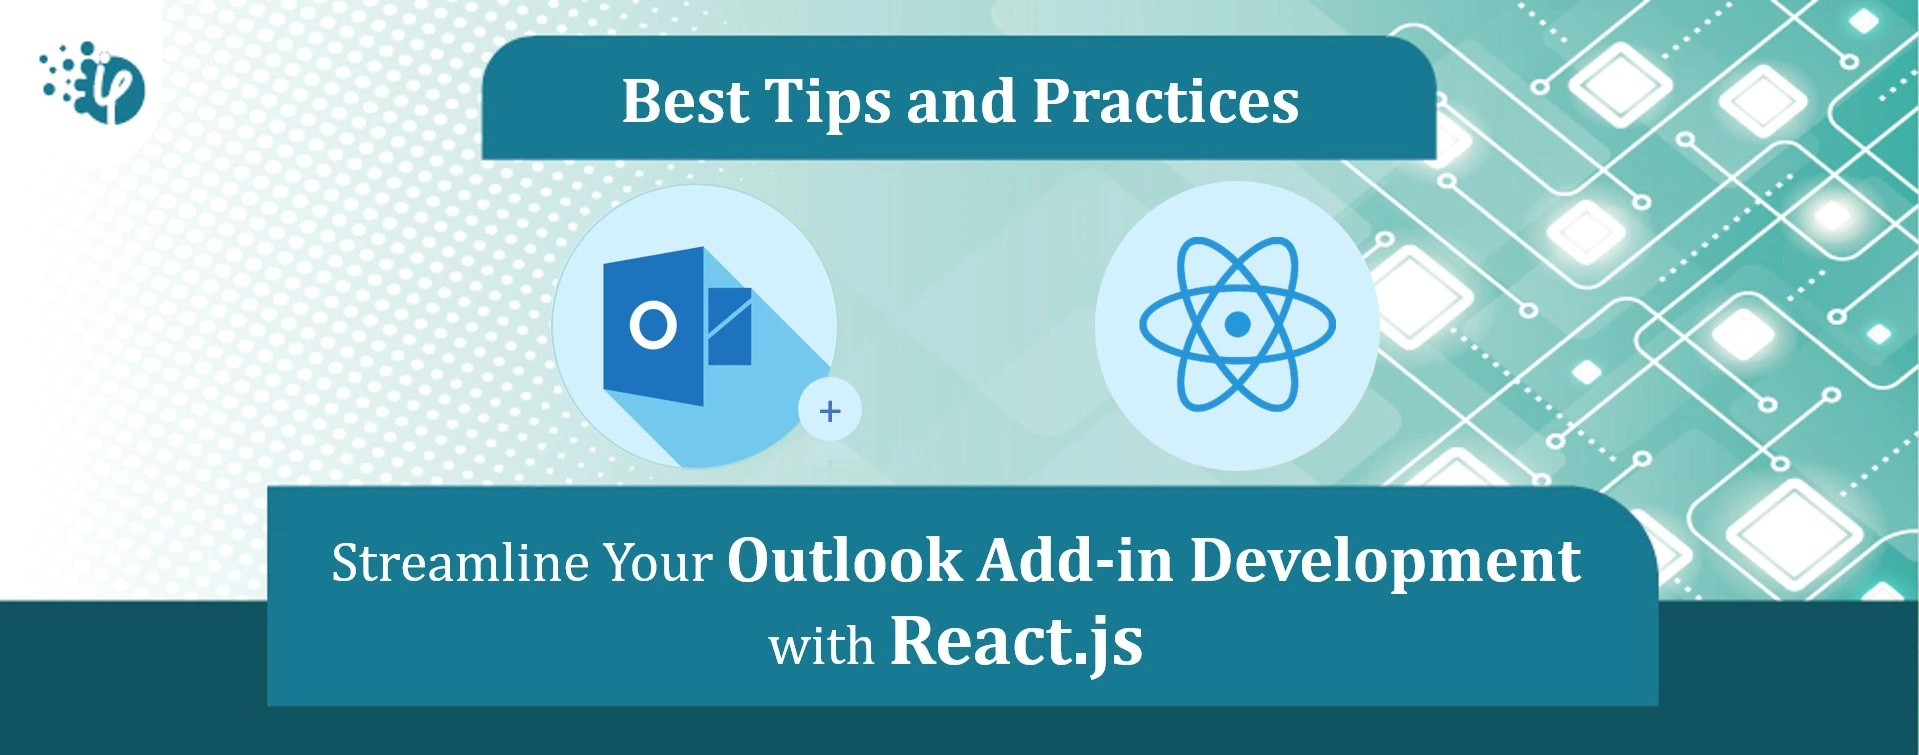 Streamline Your Outlook Add-ins Development with React.js: Best Practices and Tips